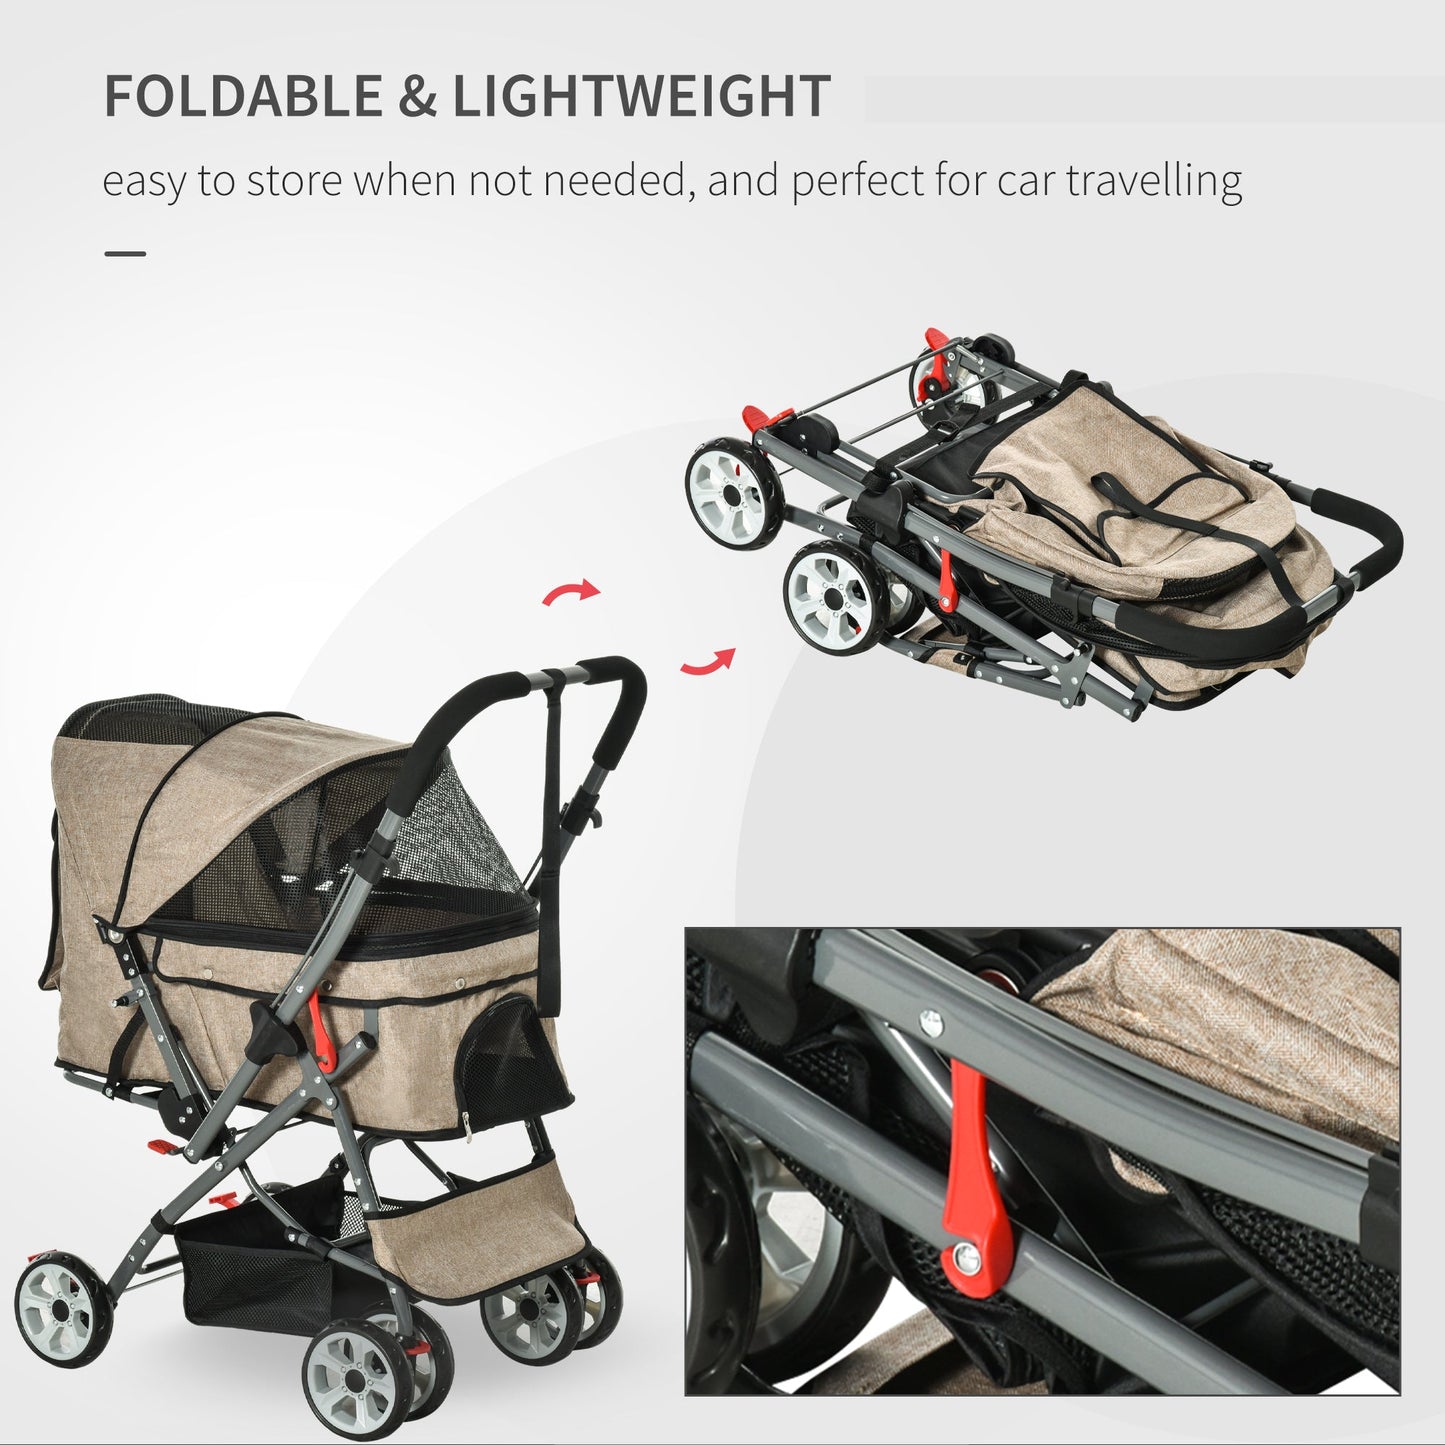 Pet Supplies-Travel Pet Stroller One-Click Fold Jogger Pushchair with Swivel Wheels, Brakes, Basket Storage, Safety Belts, Canopy, Brown - Outdoor Style Company